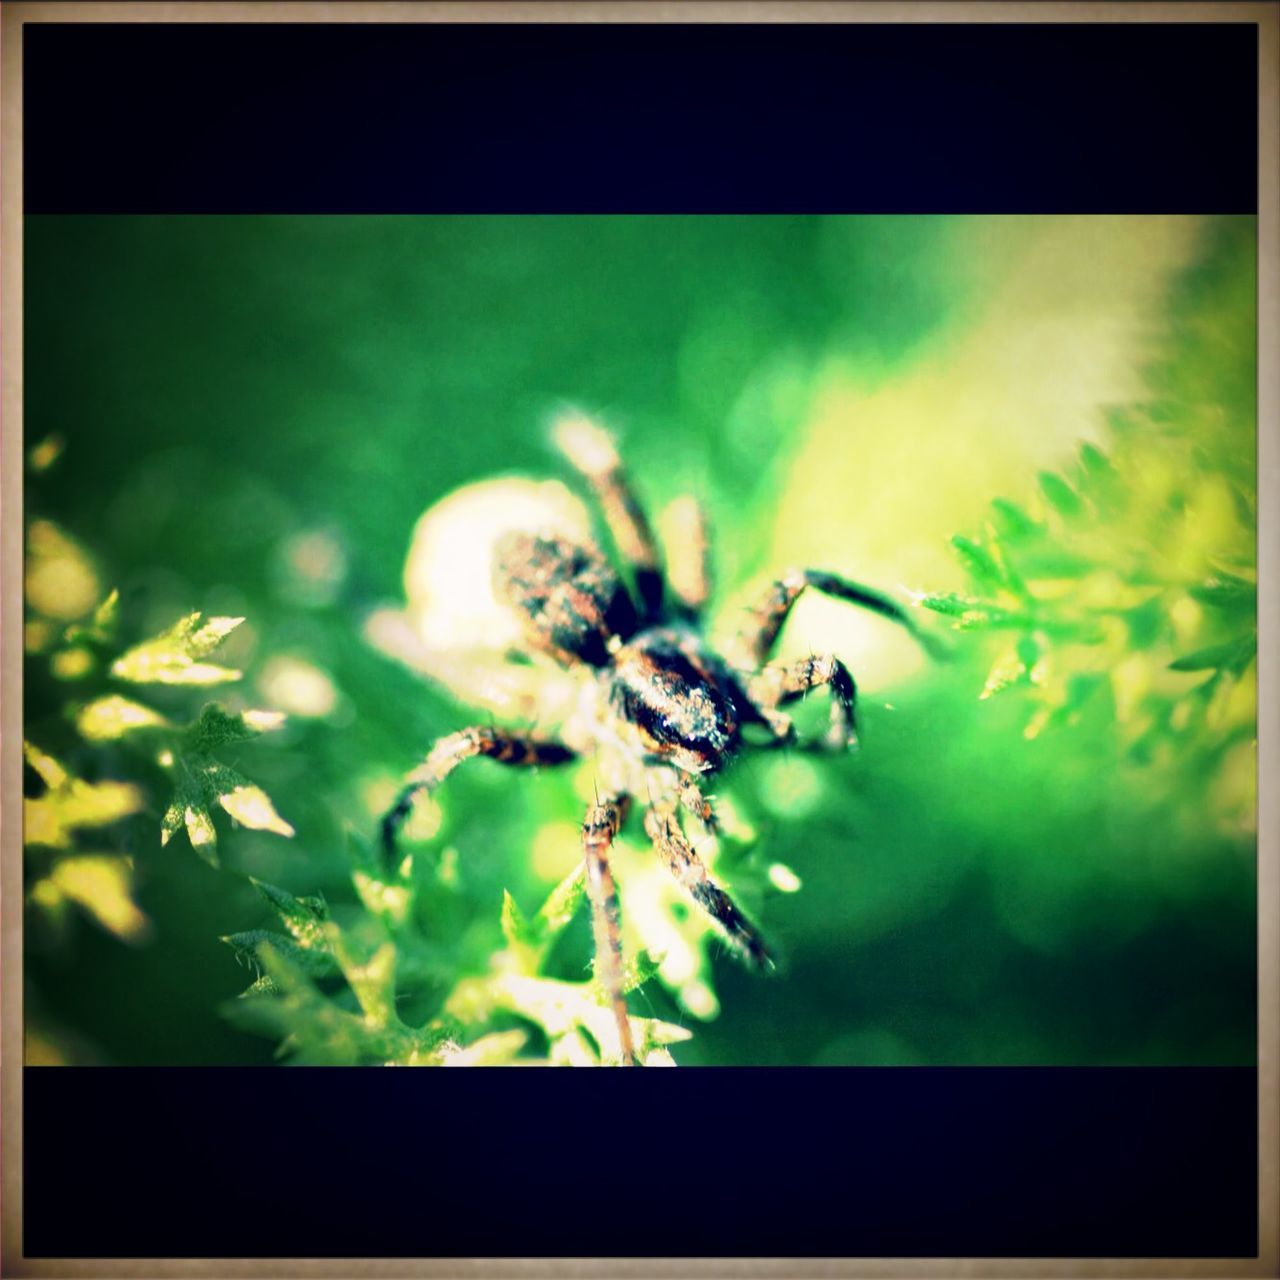 transfer print, animal themes, wildlife, auto post production filter, animals in the wild, one animal, insect, close-up, focus on foreground, plant, nature, growth, selective focus, beauty in nature, stem, outdoors, day, no people, spider, flower